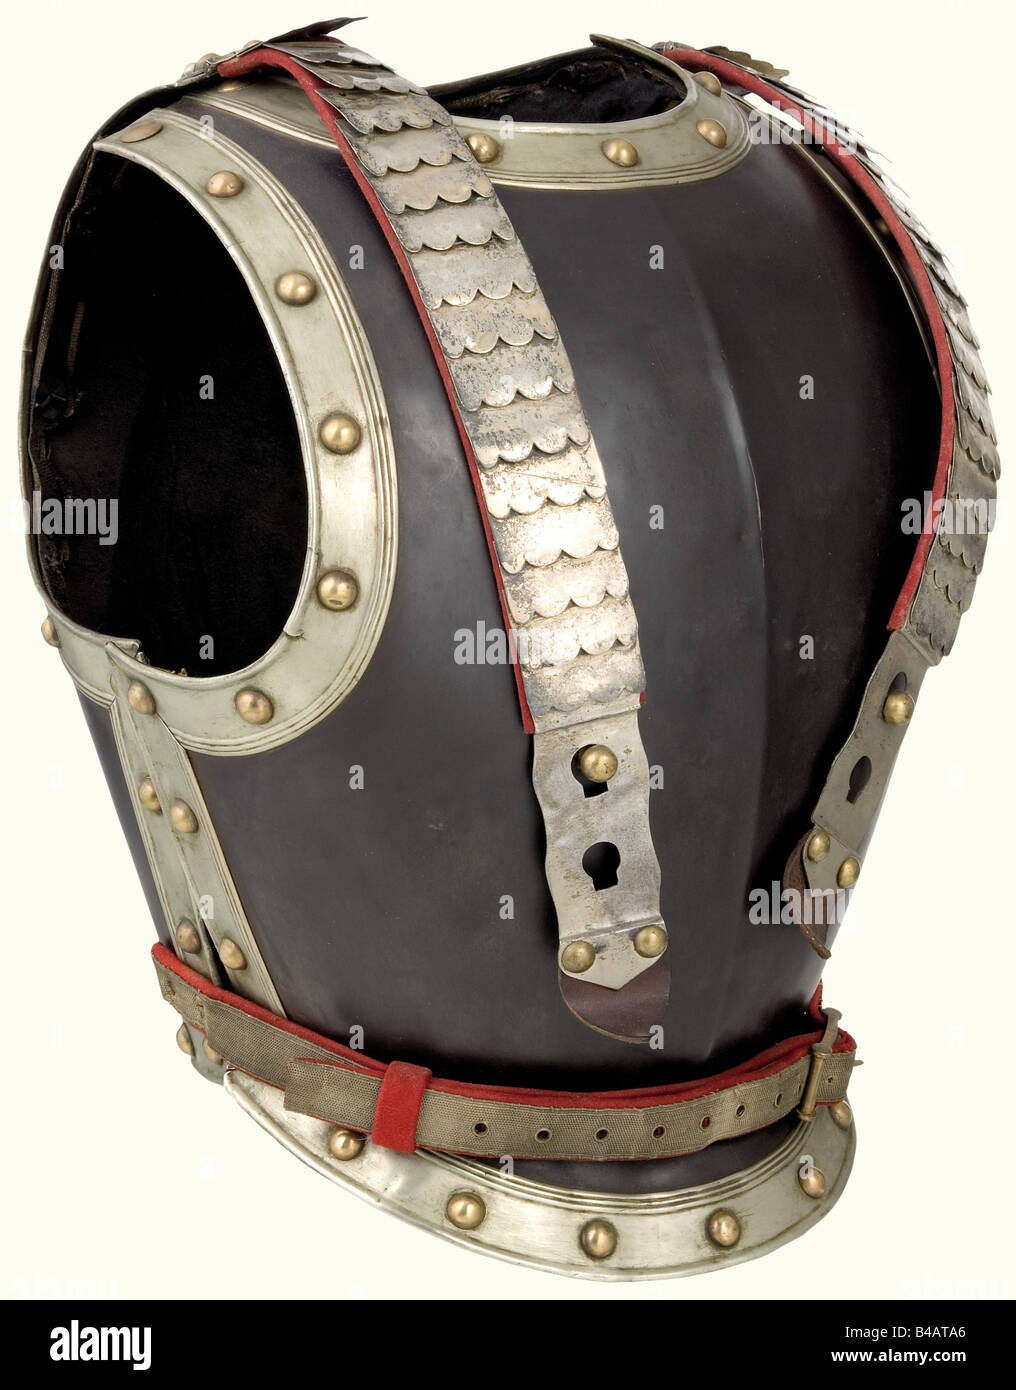 A cuirass for an officer, of the Line Cuirassiers. Very light version in blackened sheet iron with nickel-silver trim on the edges. Silver plated scale straps on red cloth backing. The stomach band is lined with red and set with silver lace. A few small cracks in the edging. historic, historical, 19th century, uniform, uniforms, piece of clothing, clothes, outfit, outfits, plating, armour-plating, armour, armor, reactive armour, cuirass, metal, protection, defensive arms, equipment, equipments, object, objects, stills, clipping, clippings, cut out, cut-out, cut, Stock Photo